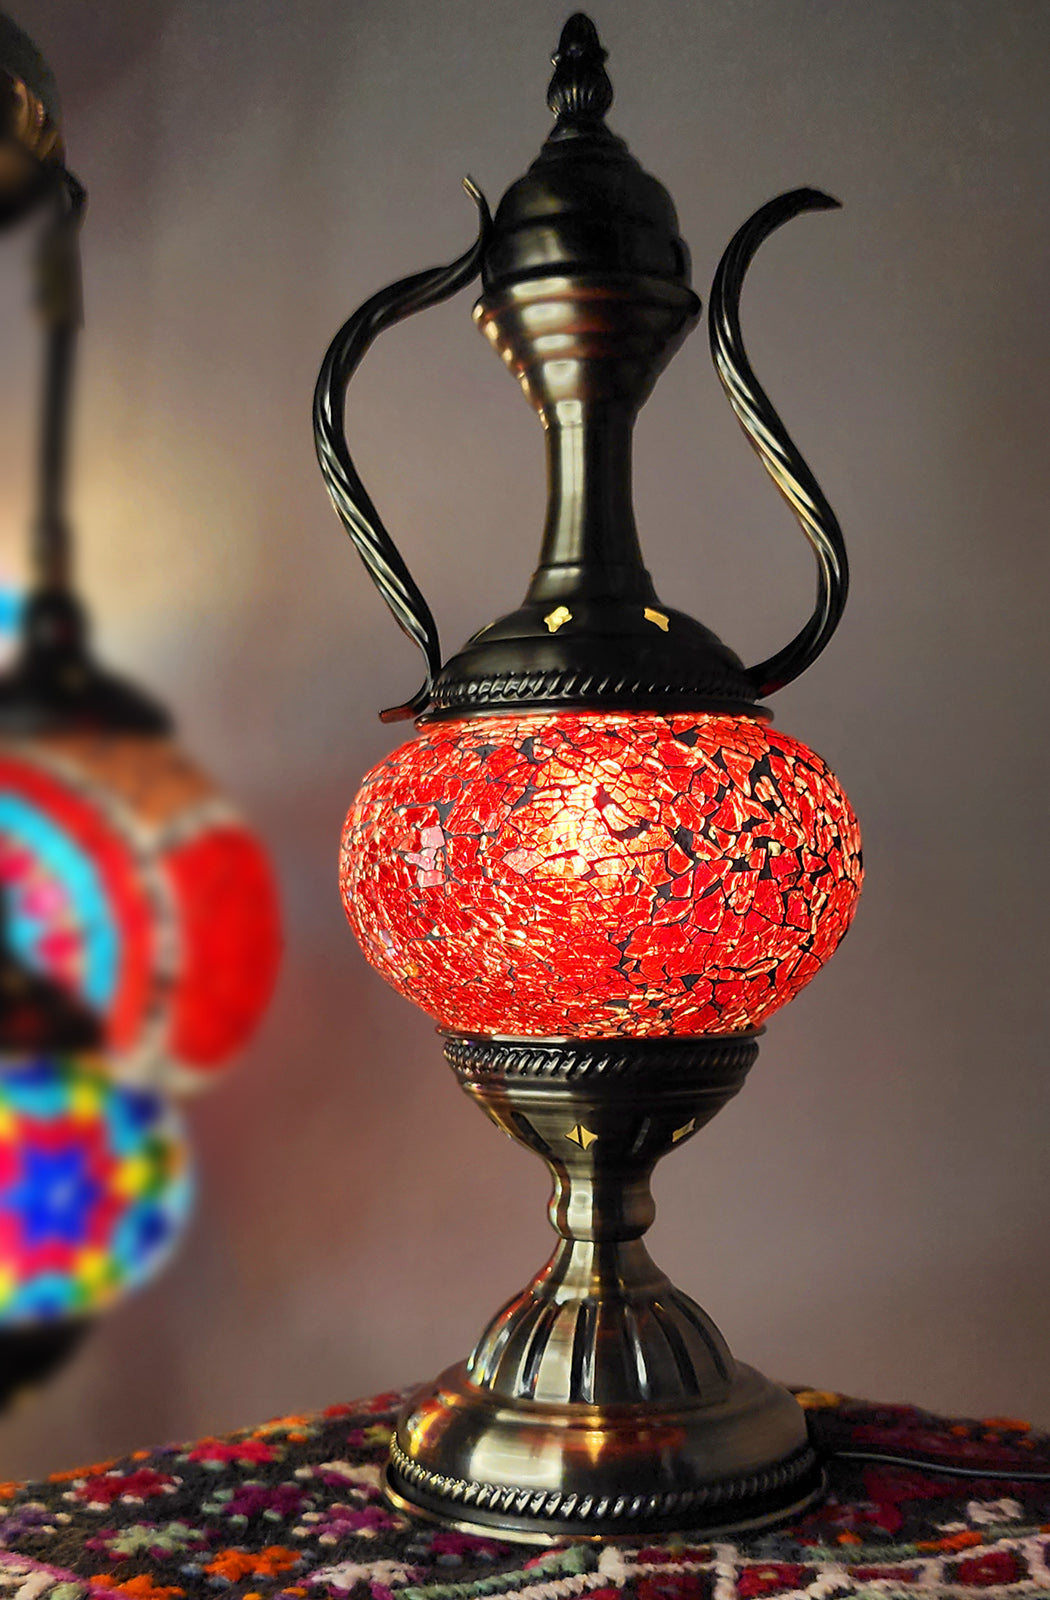 Turkish Mosaic Lamp - Crackle Red Limited Edition